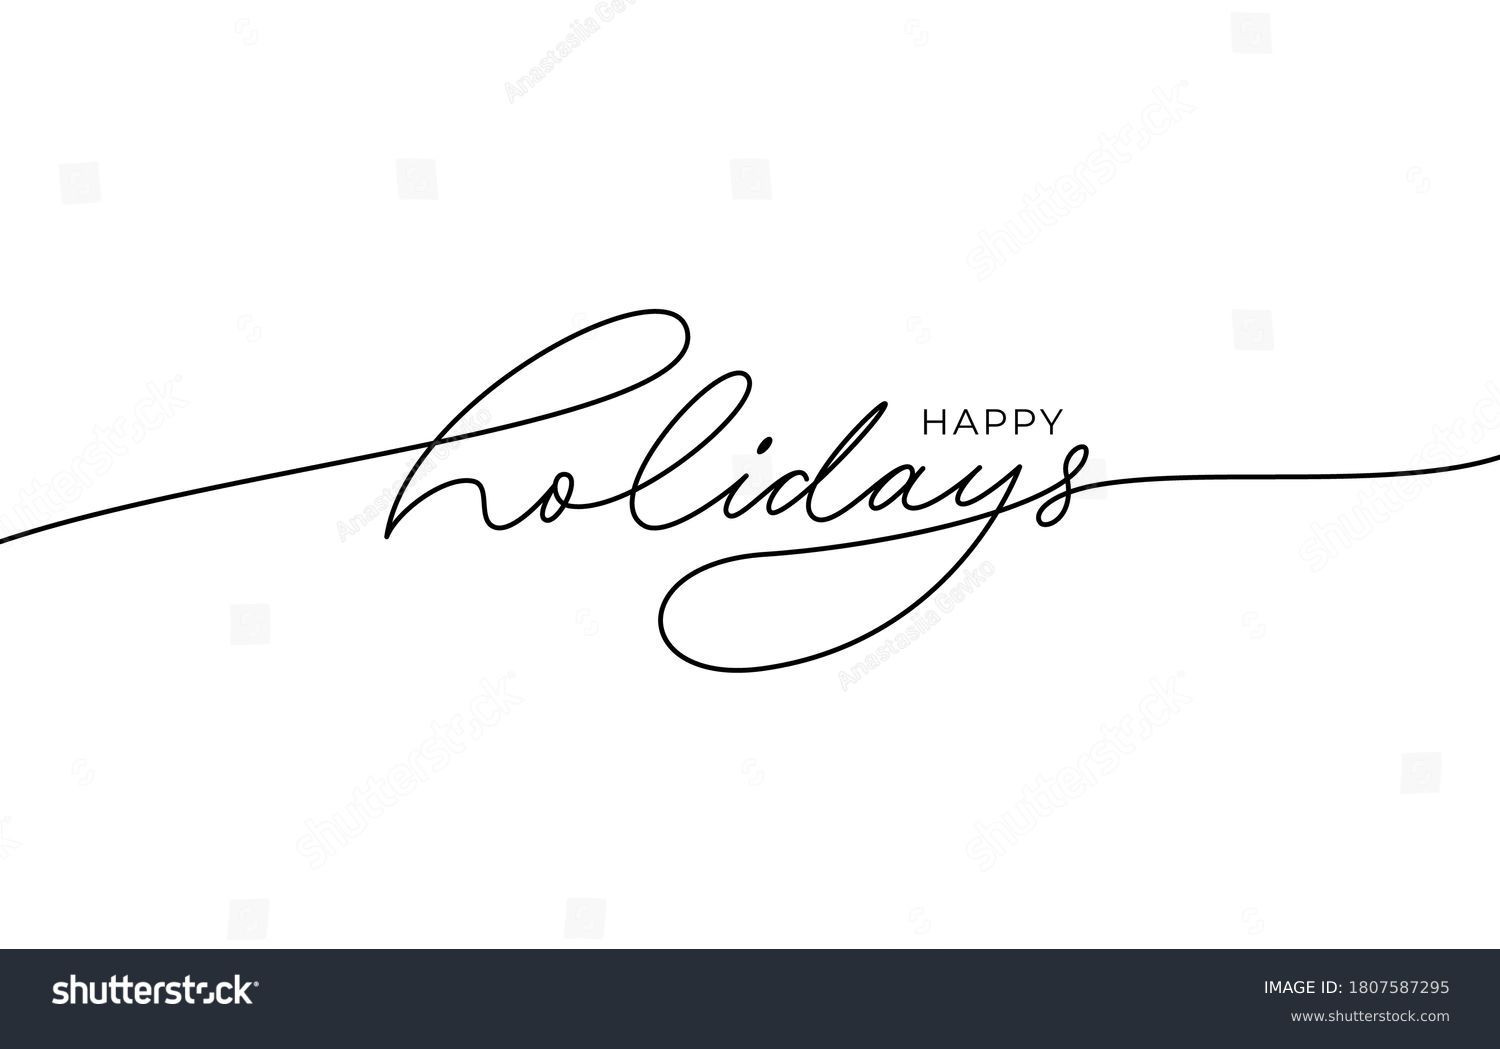 Happy holidays phrase. Modern pen vector calligraphy. Greeting holiday card, Christmas and New Year phrase. Ink illustration isolated on white. Hand lettering inscription to winter holiday design #1807587295